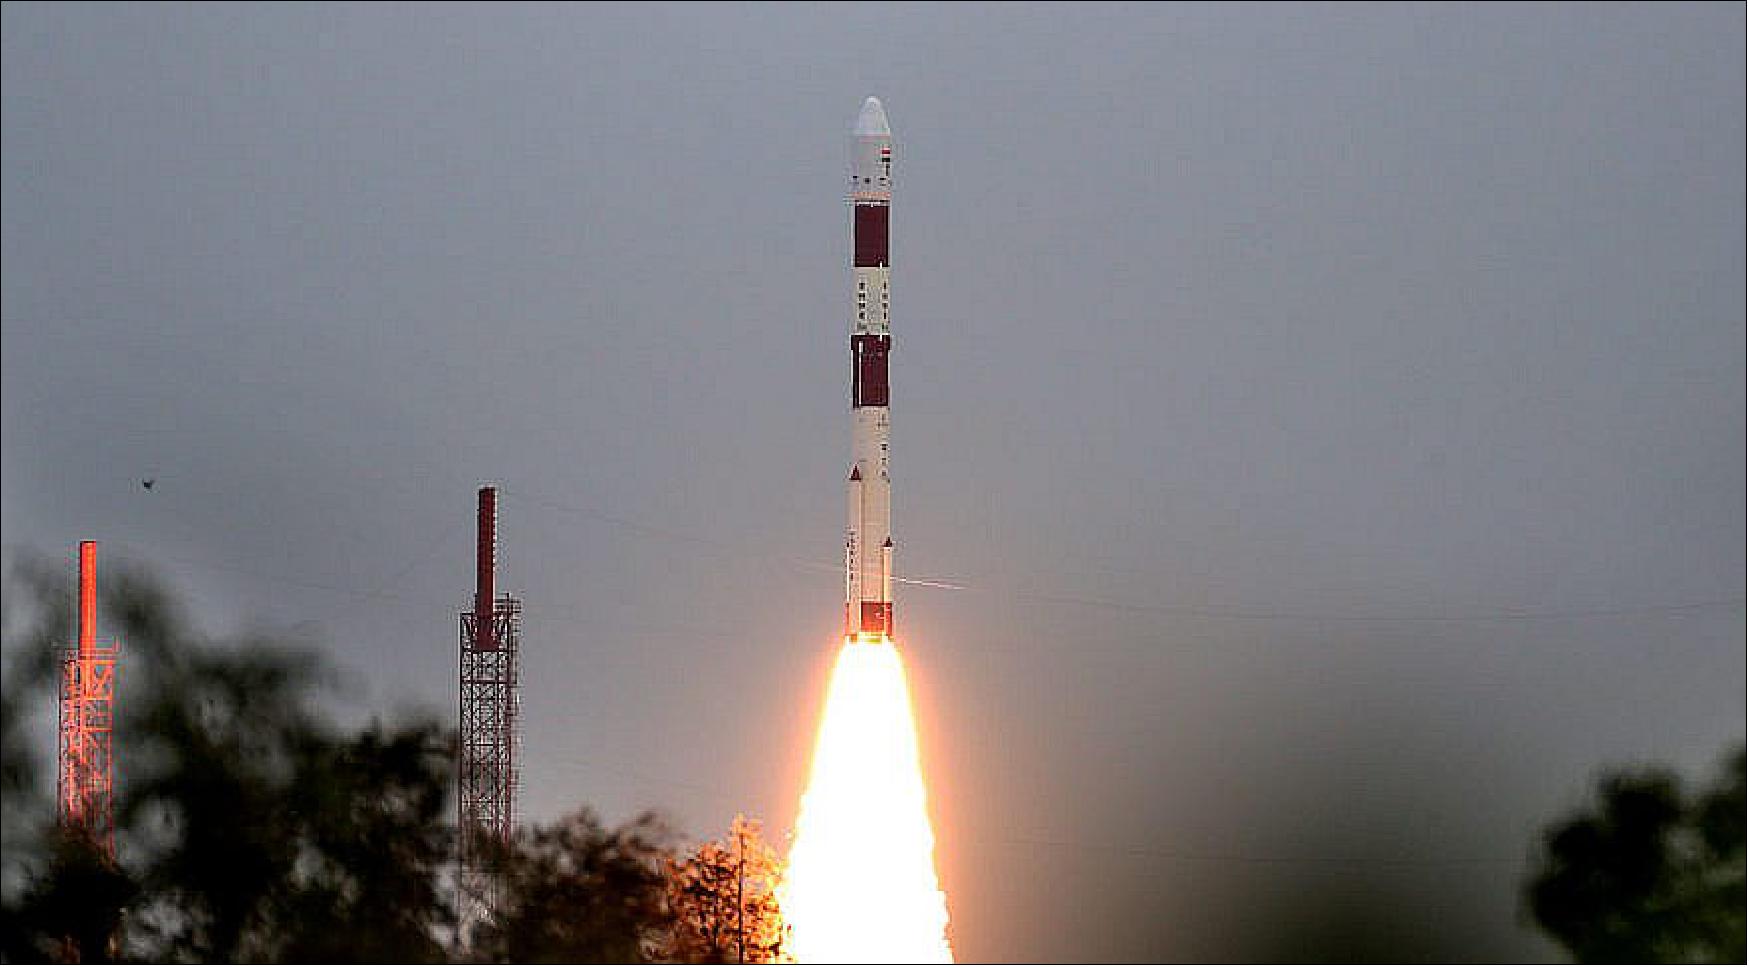 Figure 1: Launch of PSLV-C49 from Satish Dhawan Space Center carrying EOS-1 on Nov. 7, 2020 (image credit: ISRO)